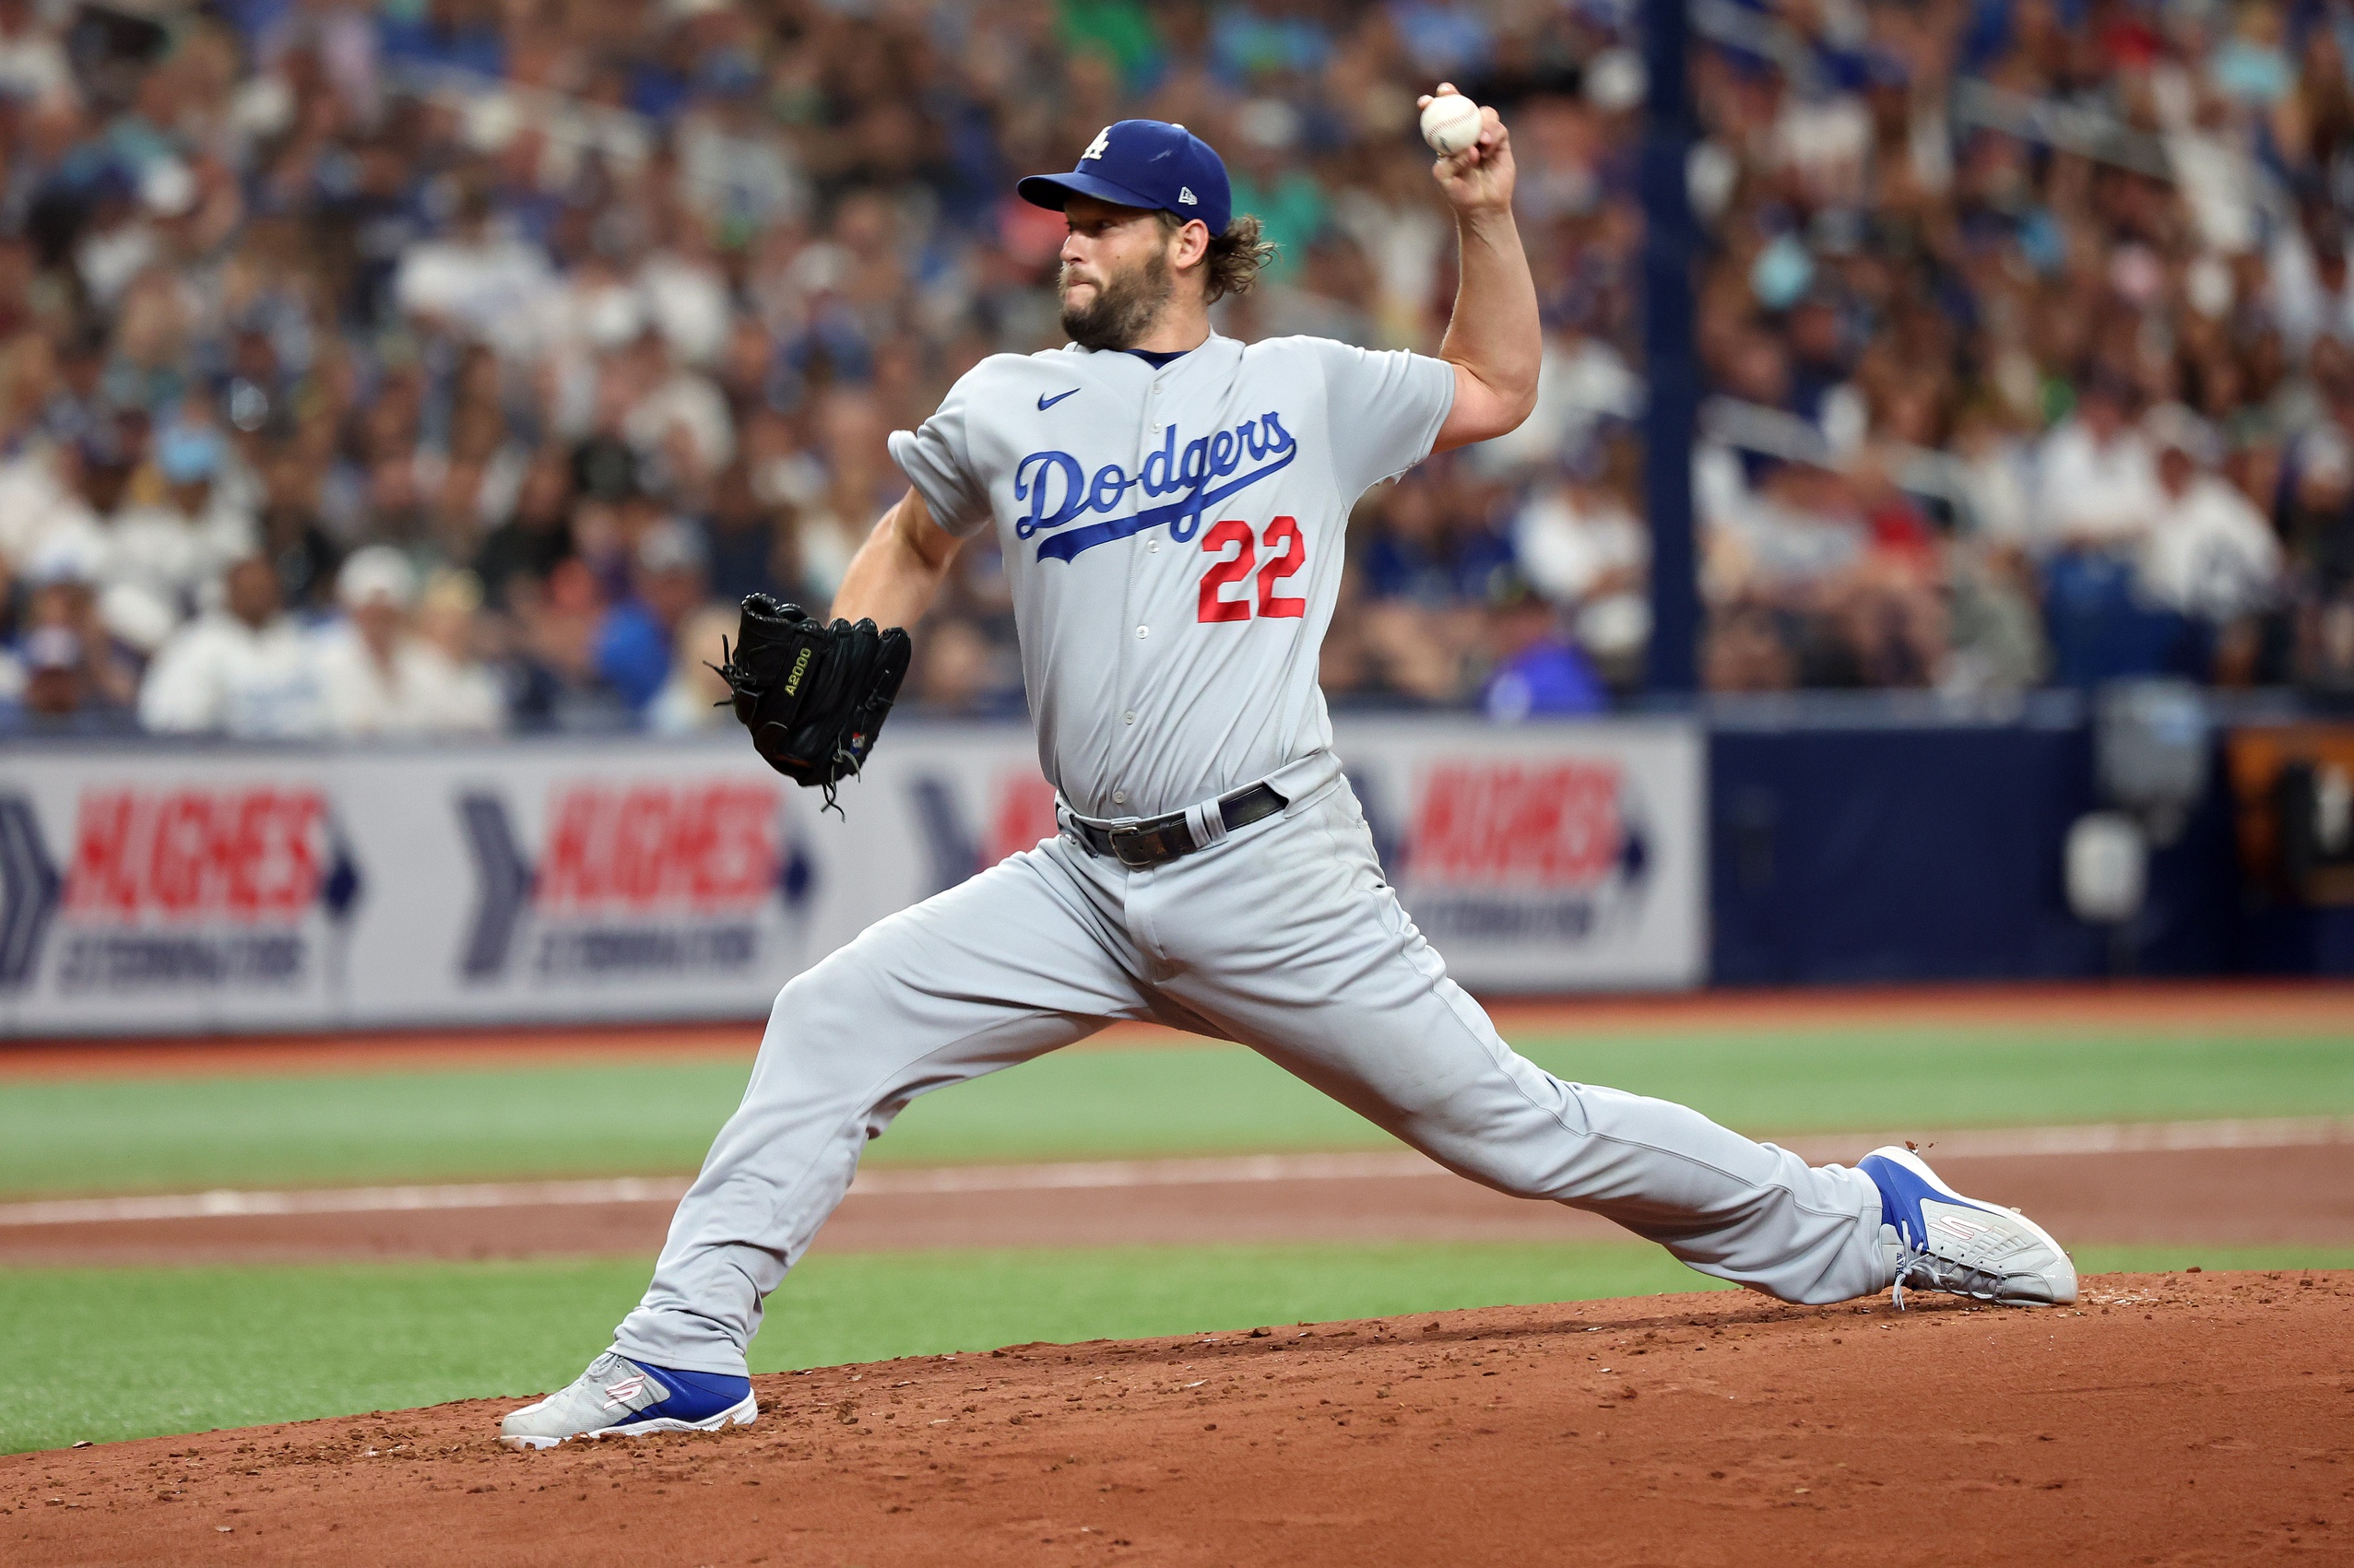 Dodgers need starting pitching reinforcements, and soon